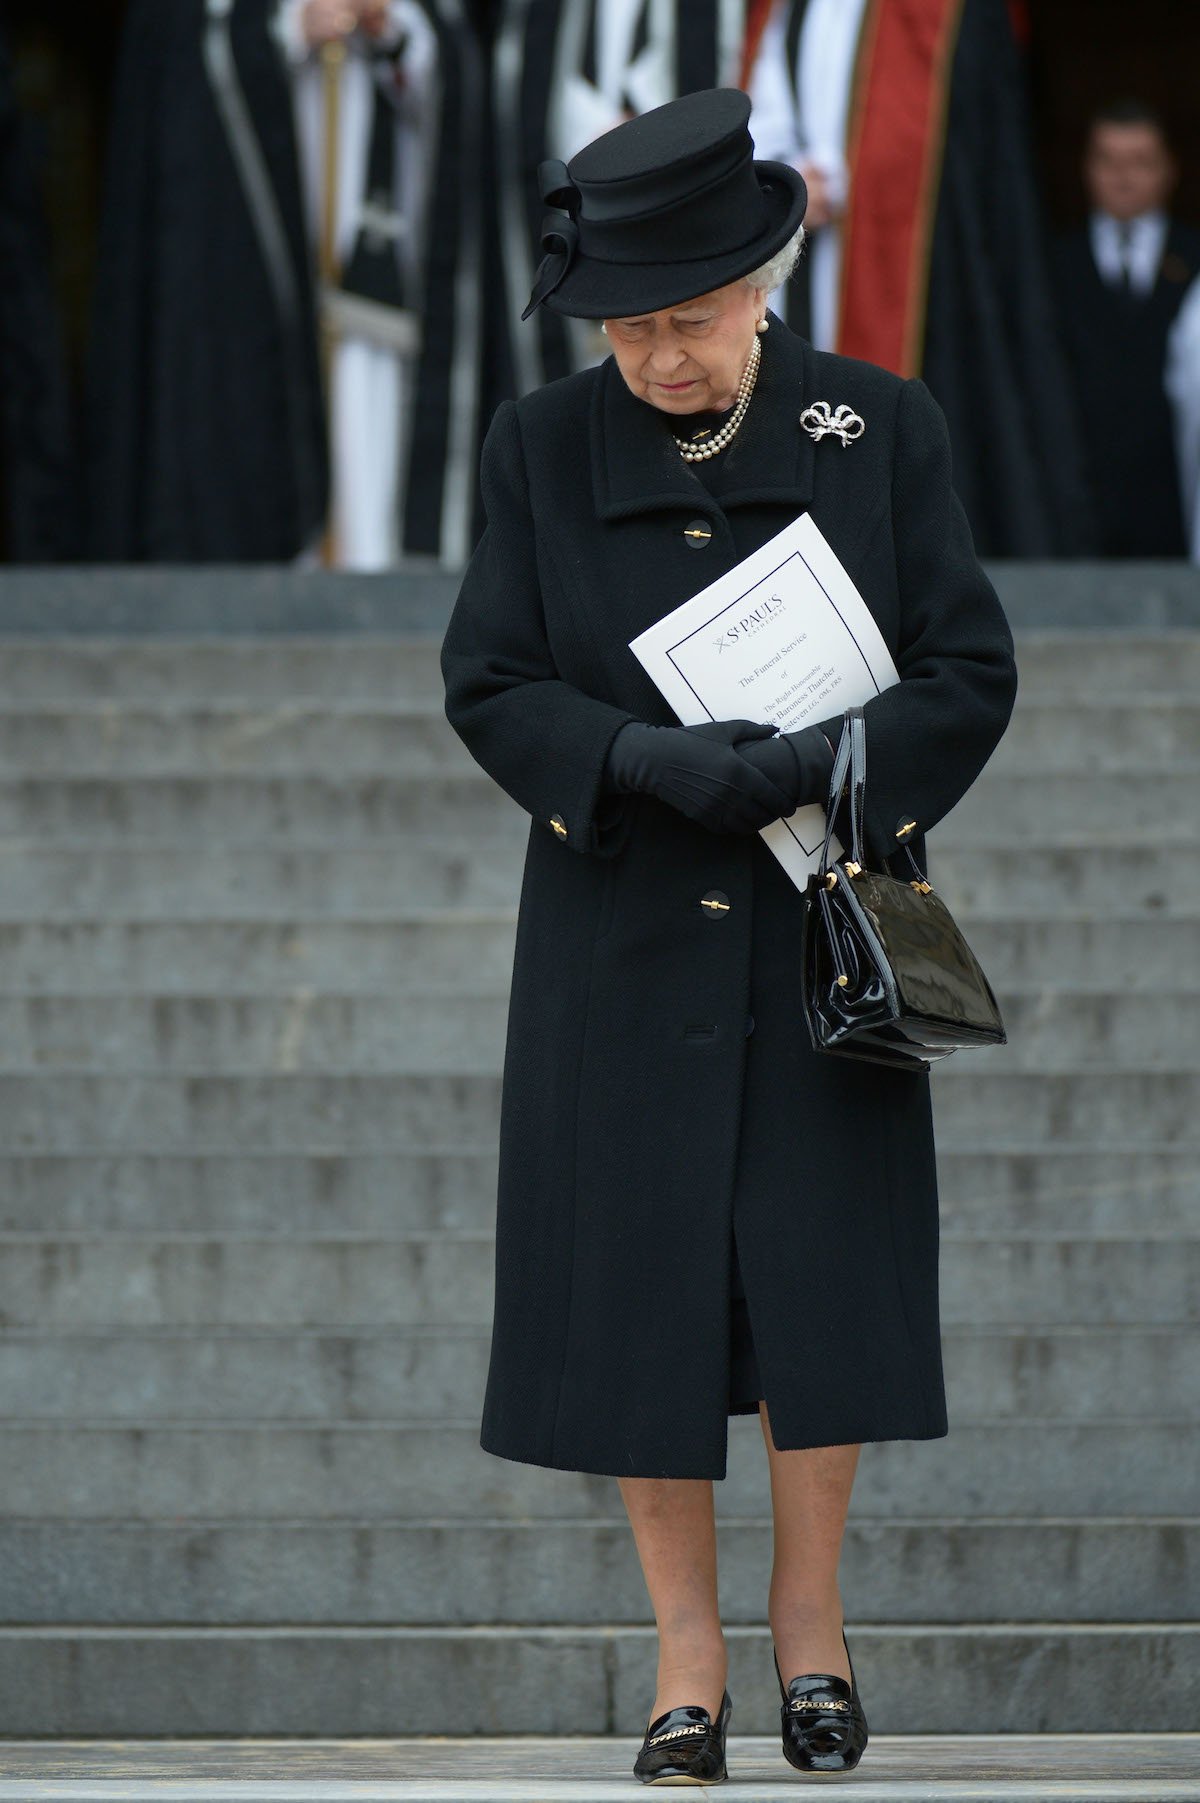 Queen Elizabeth Queen Elizabeth II departs the Ceremonial funeral of former British Prime Minister Baroness Thatcher at St Paul's Cathedral